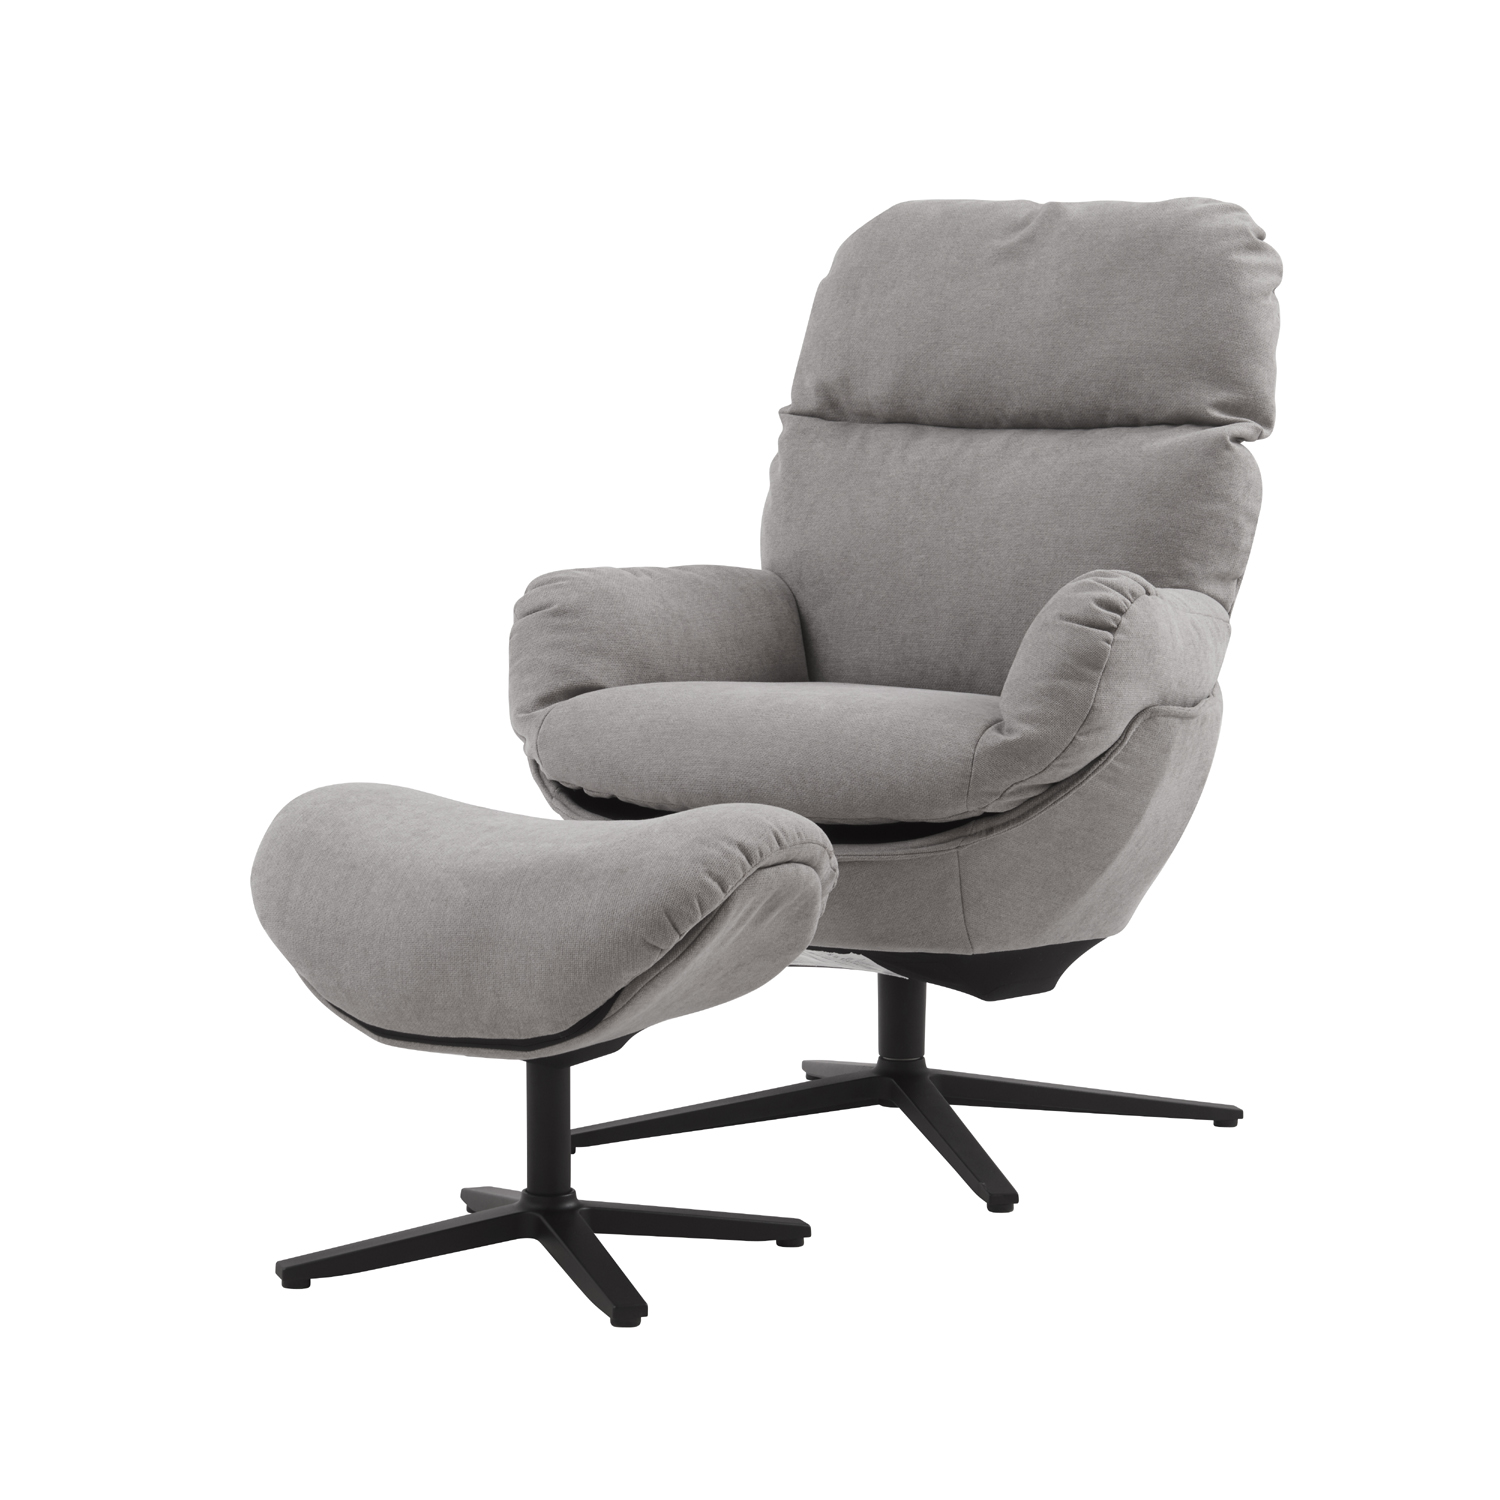 glider chair w/ with ottoman, swivel lounge chair W/ ottoman, accent lazy recliner , arm chair /rocking footstool,aluminum alloy  base, comfy fabric leisure sofa chair，300LB warm grey-Boyel Living